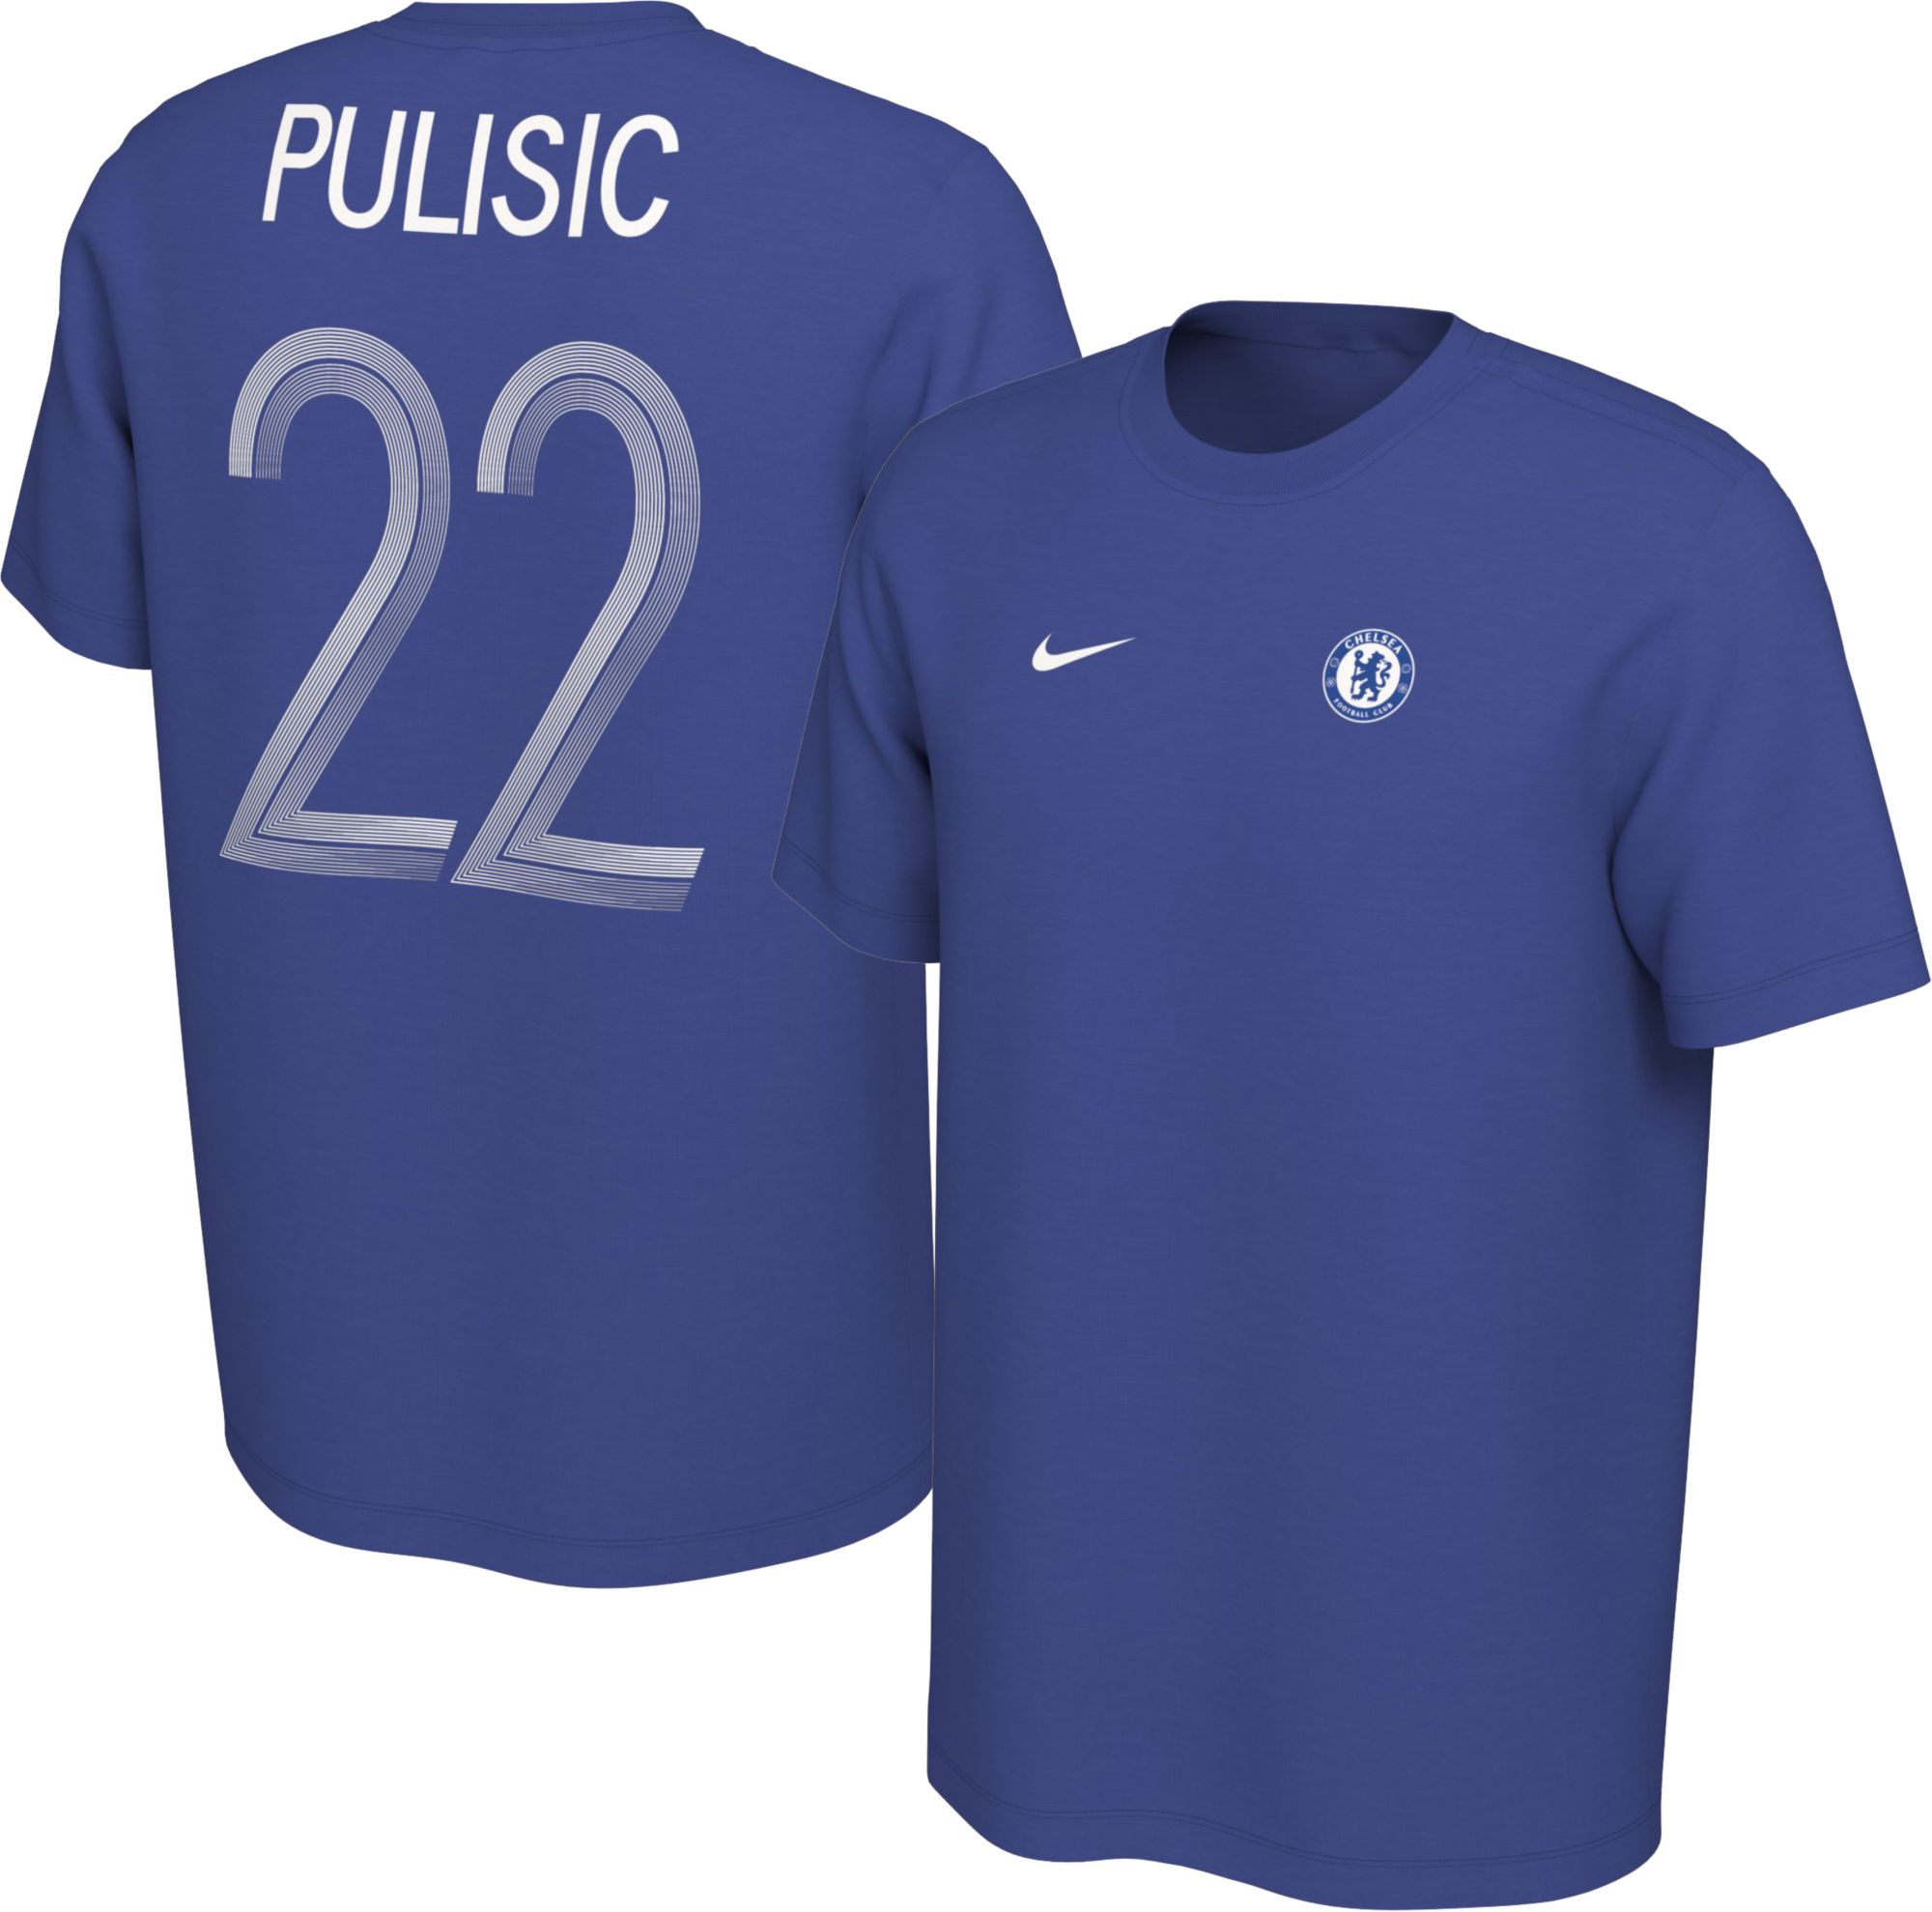 pulisic chelsea youth jersey